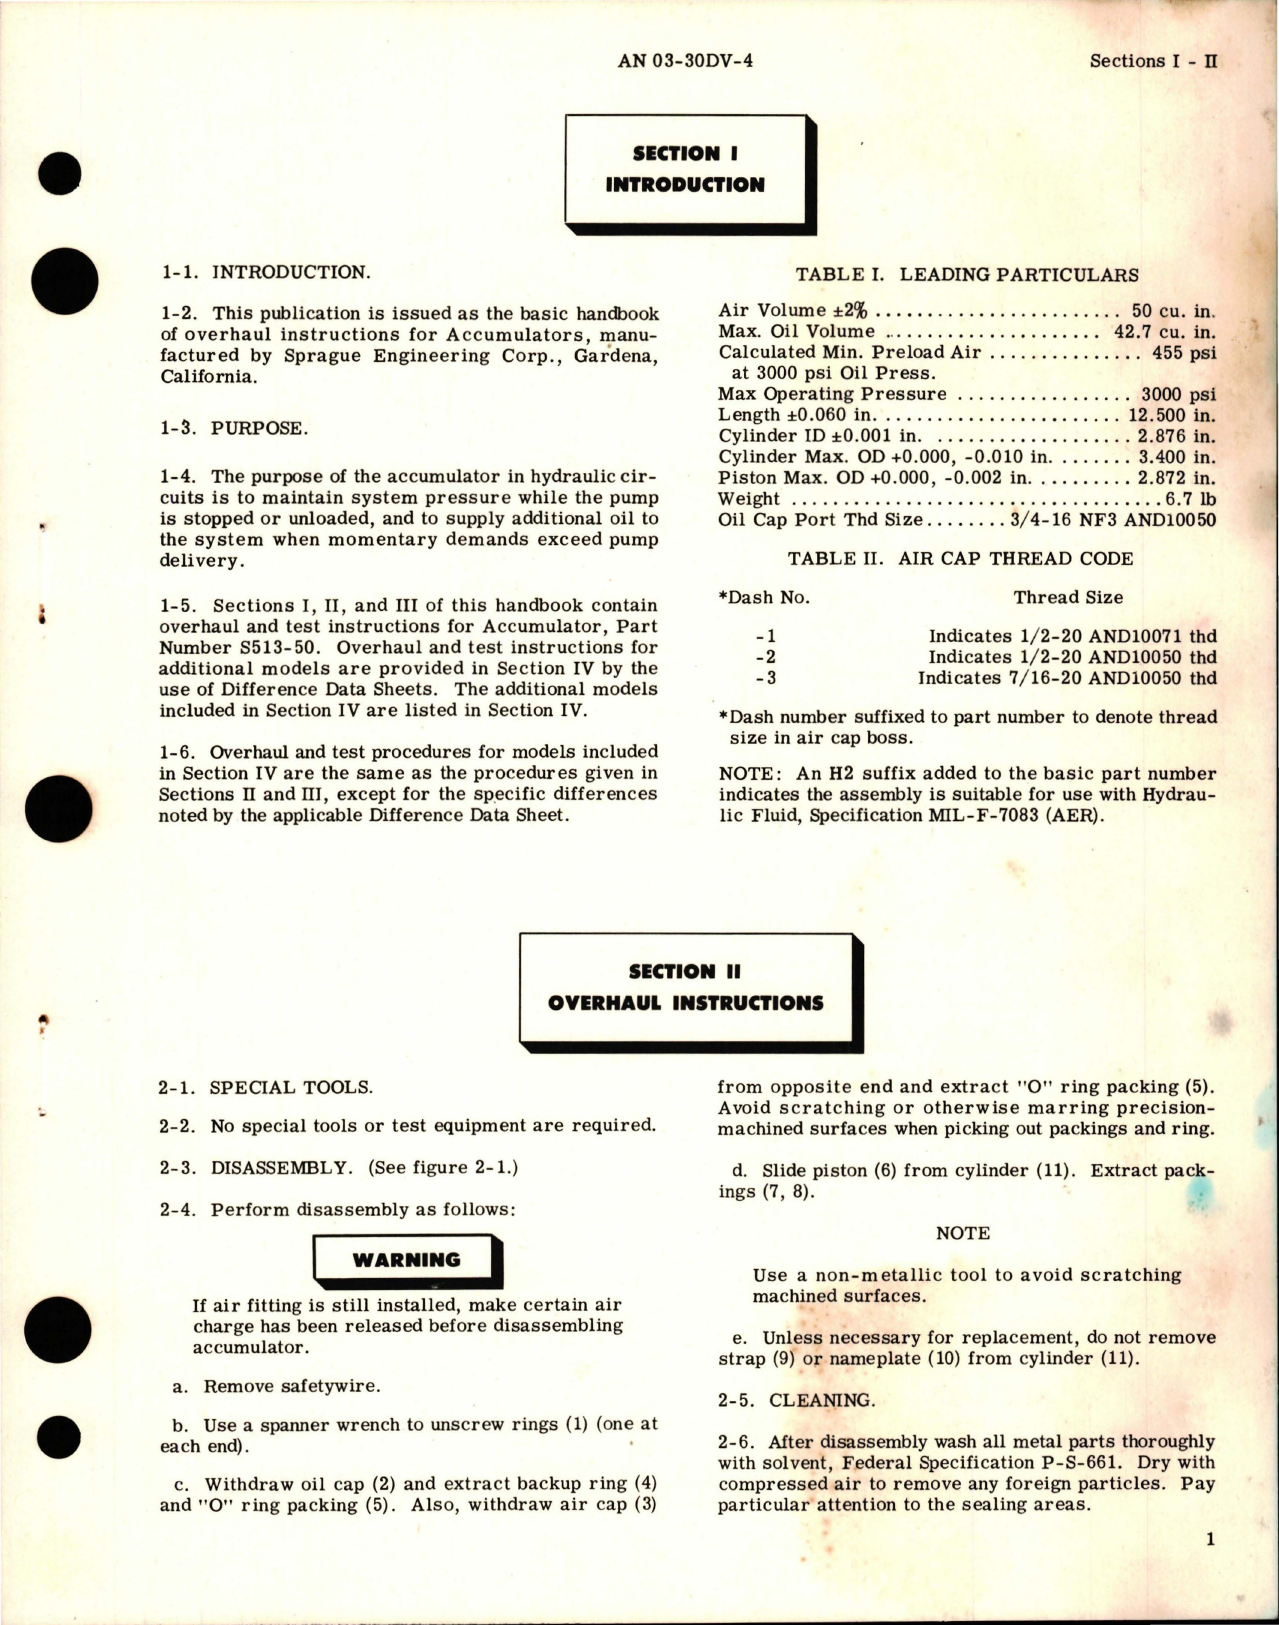 Sample page 5 from AirCorps Library document: Overhaul Instructions for Accumulators